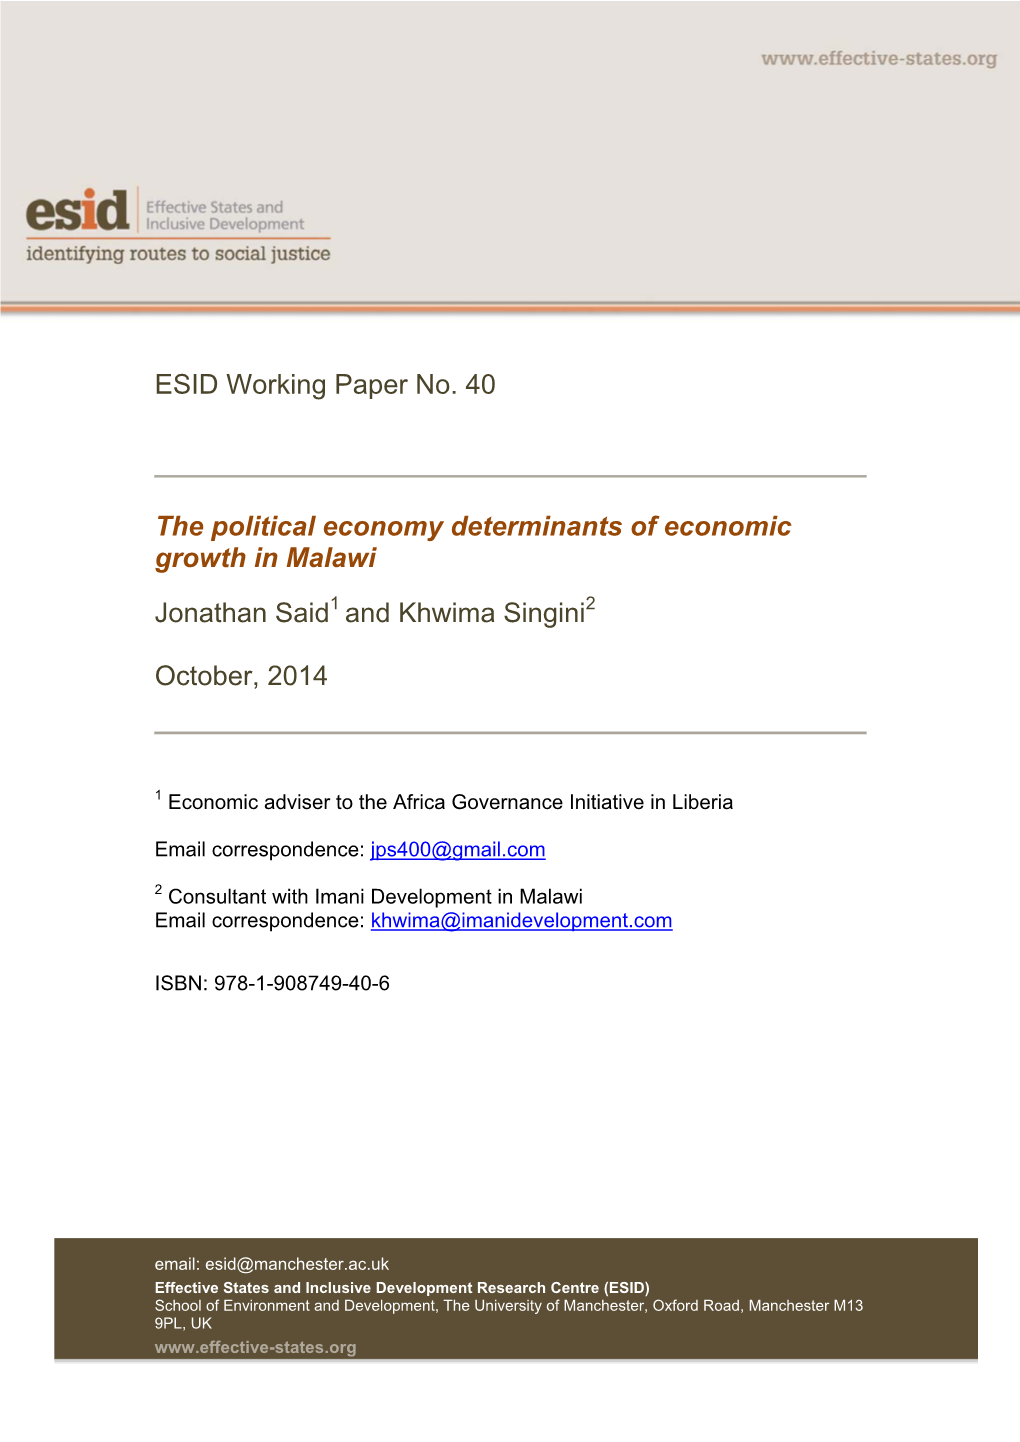 ESID Working Paper No. 40 the Political Economy Determinants Of